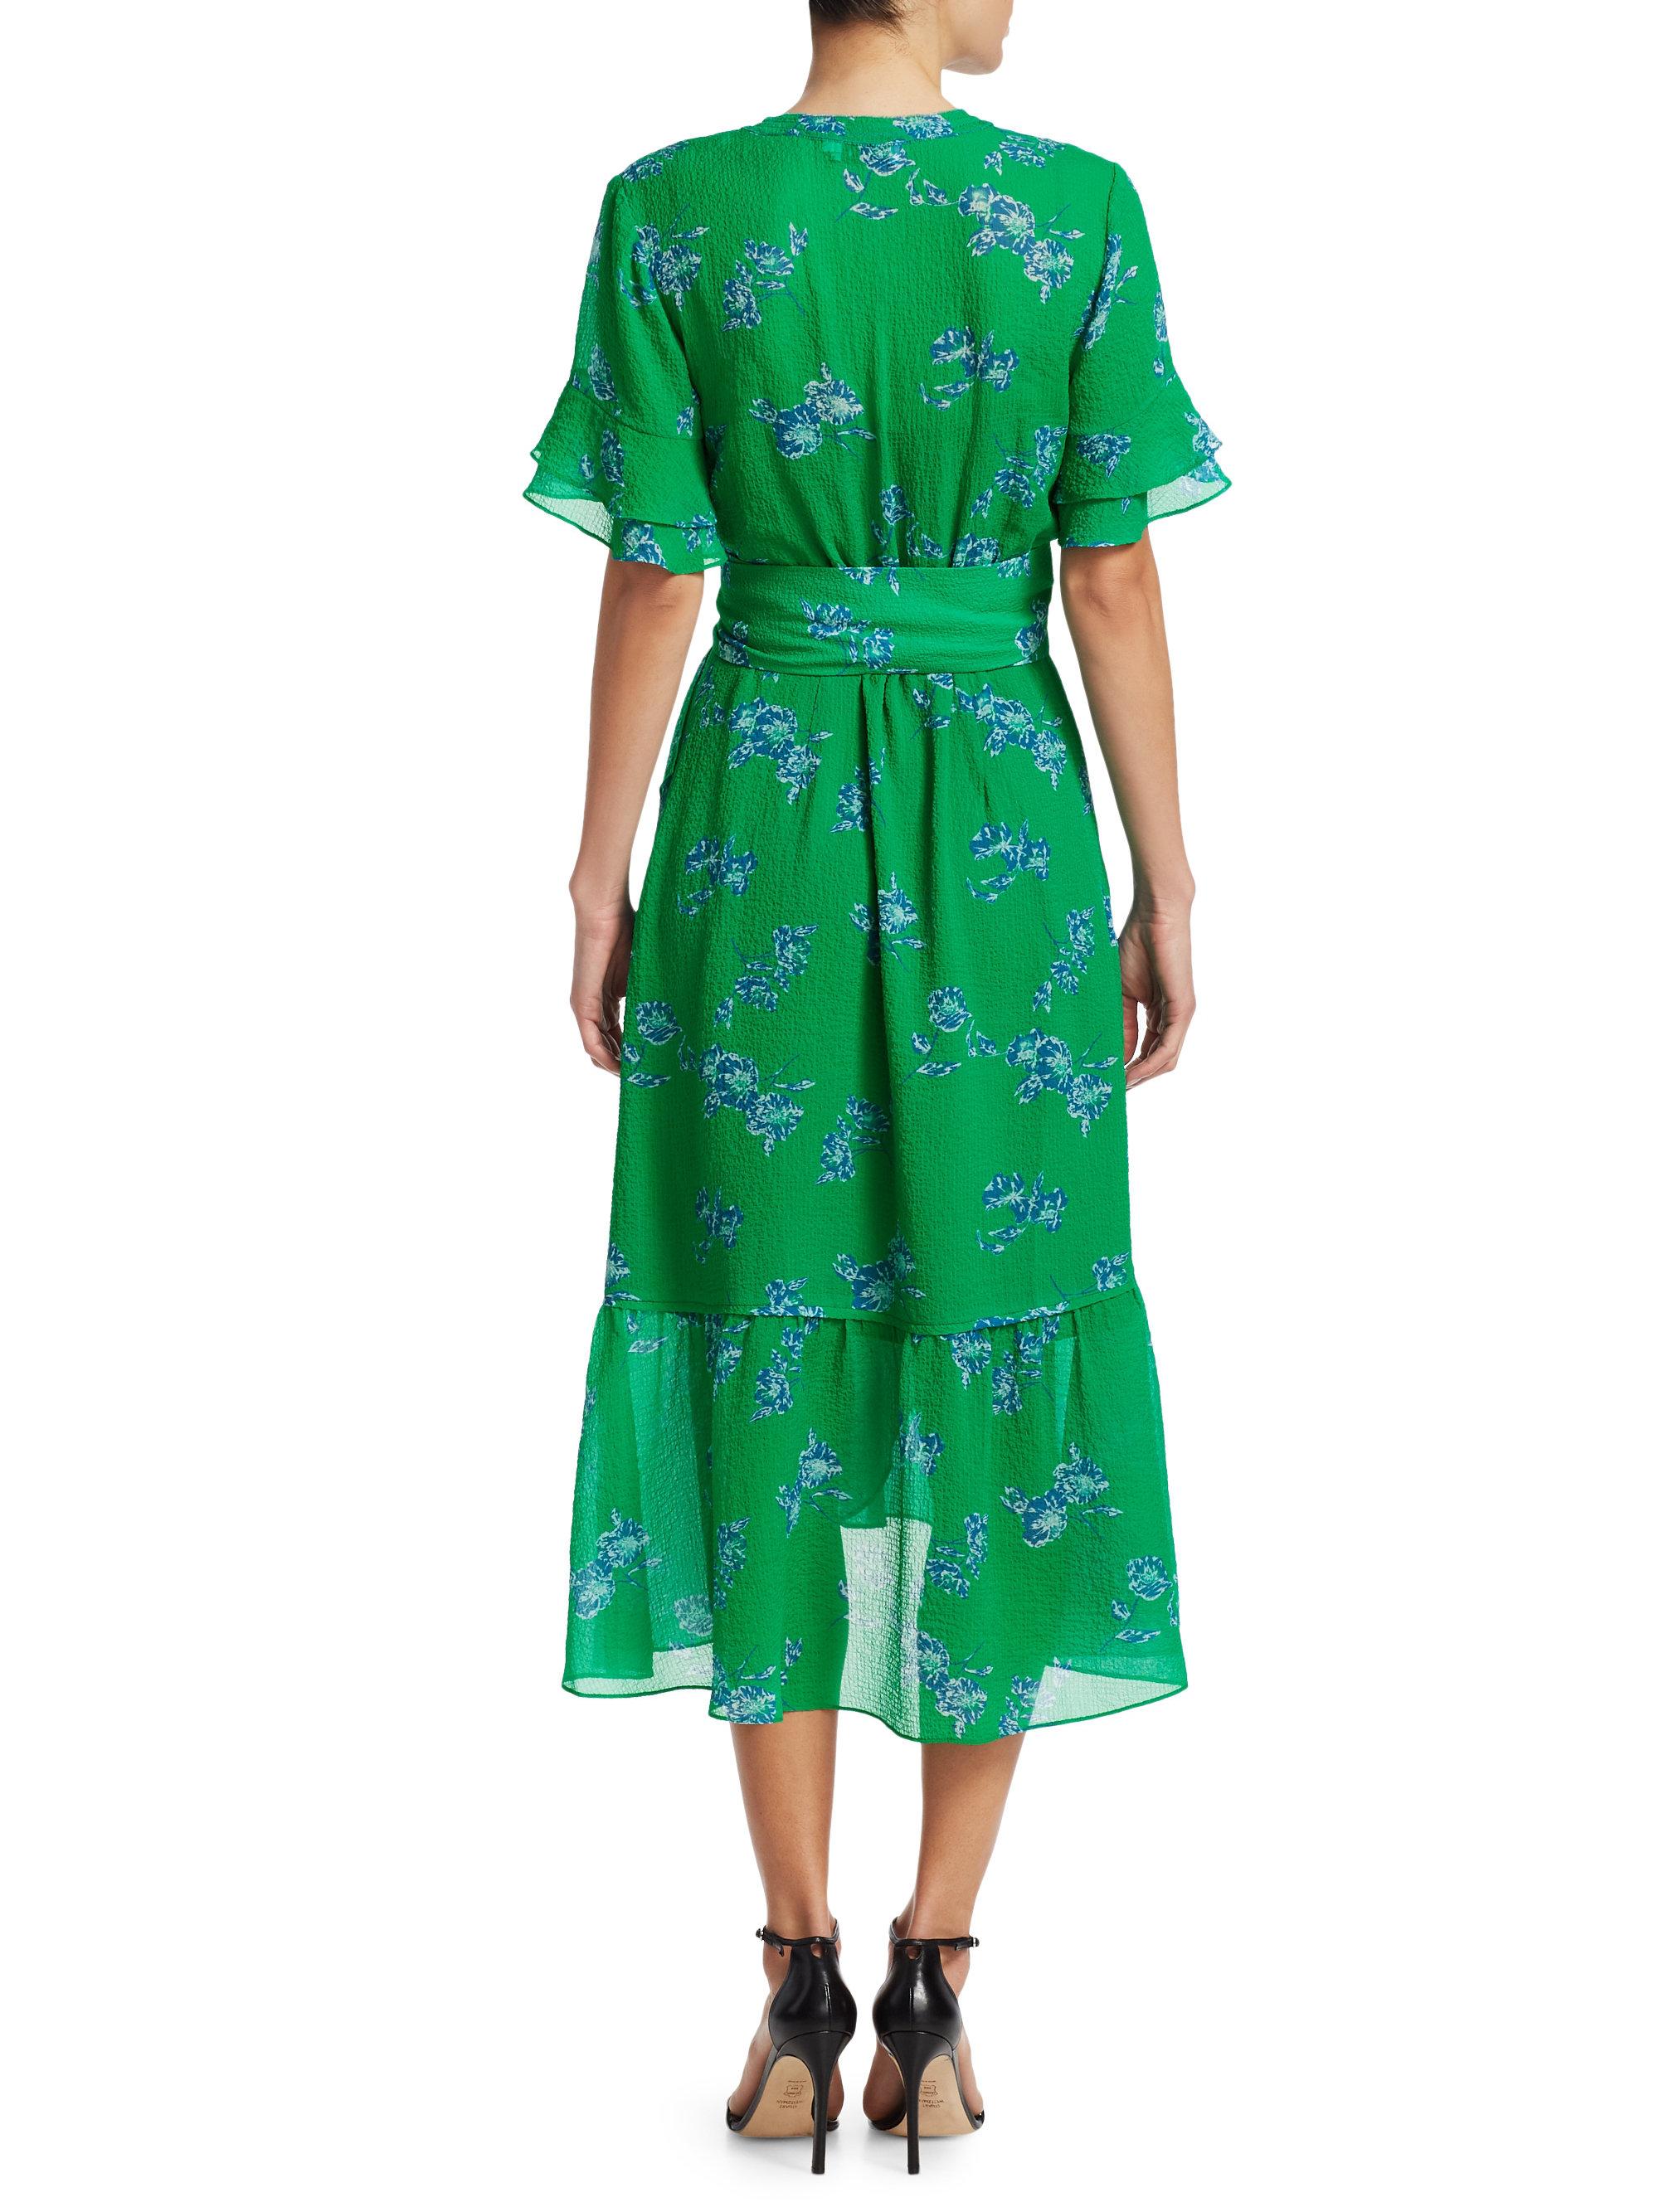 Lyst - Tanya Taylor Blaire Floral-print Dress in Green